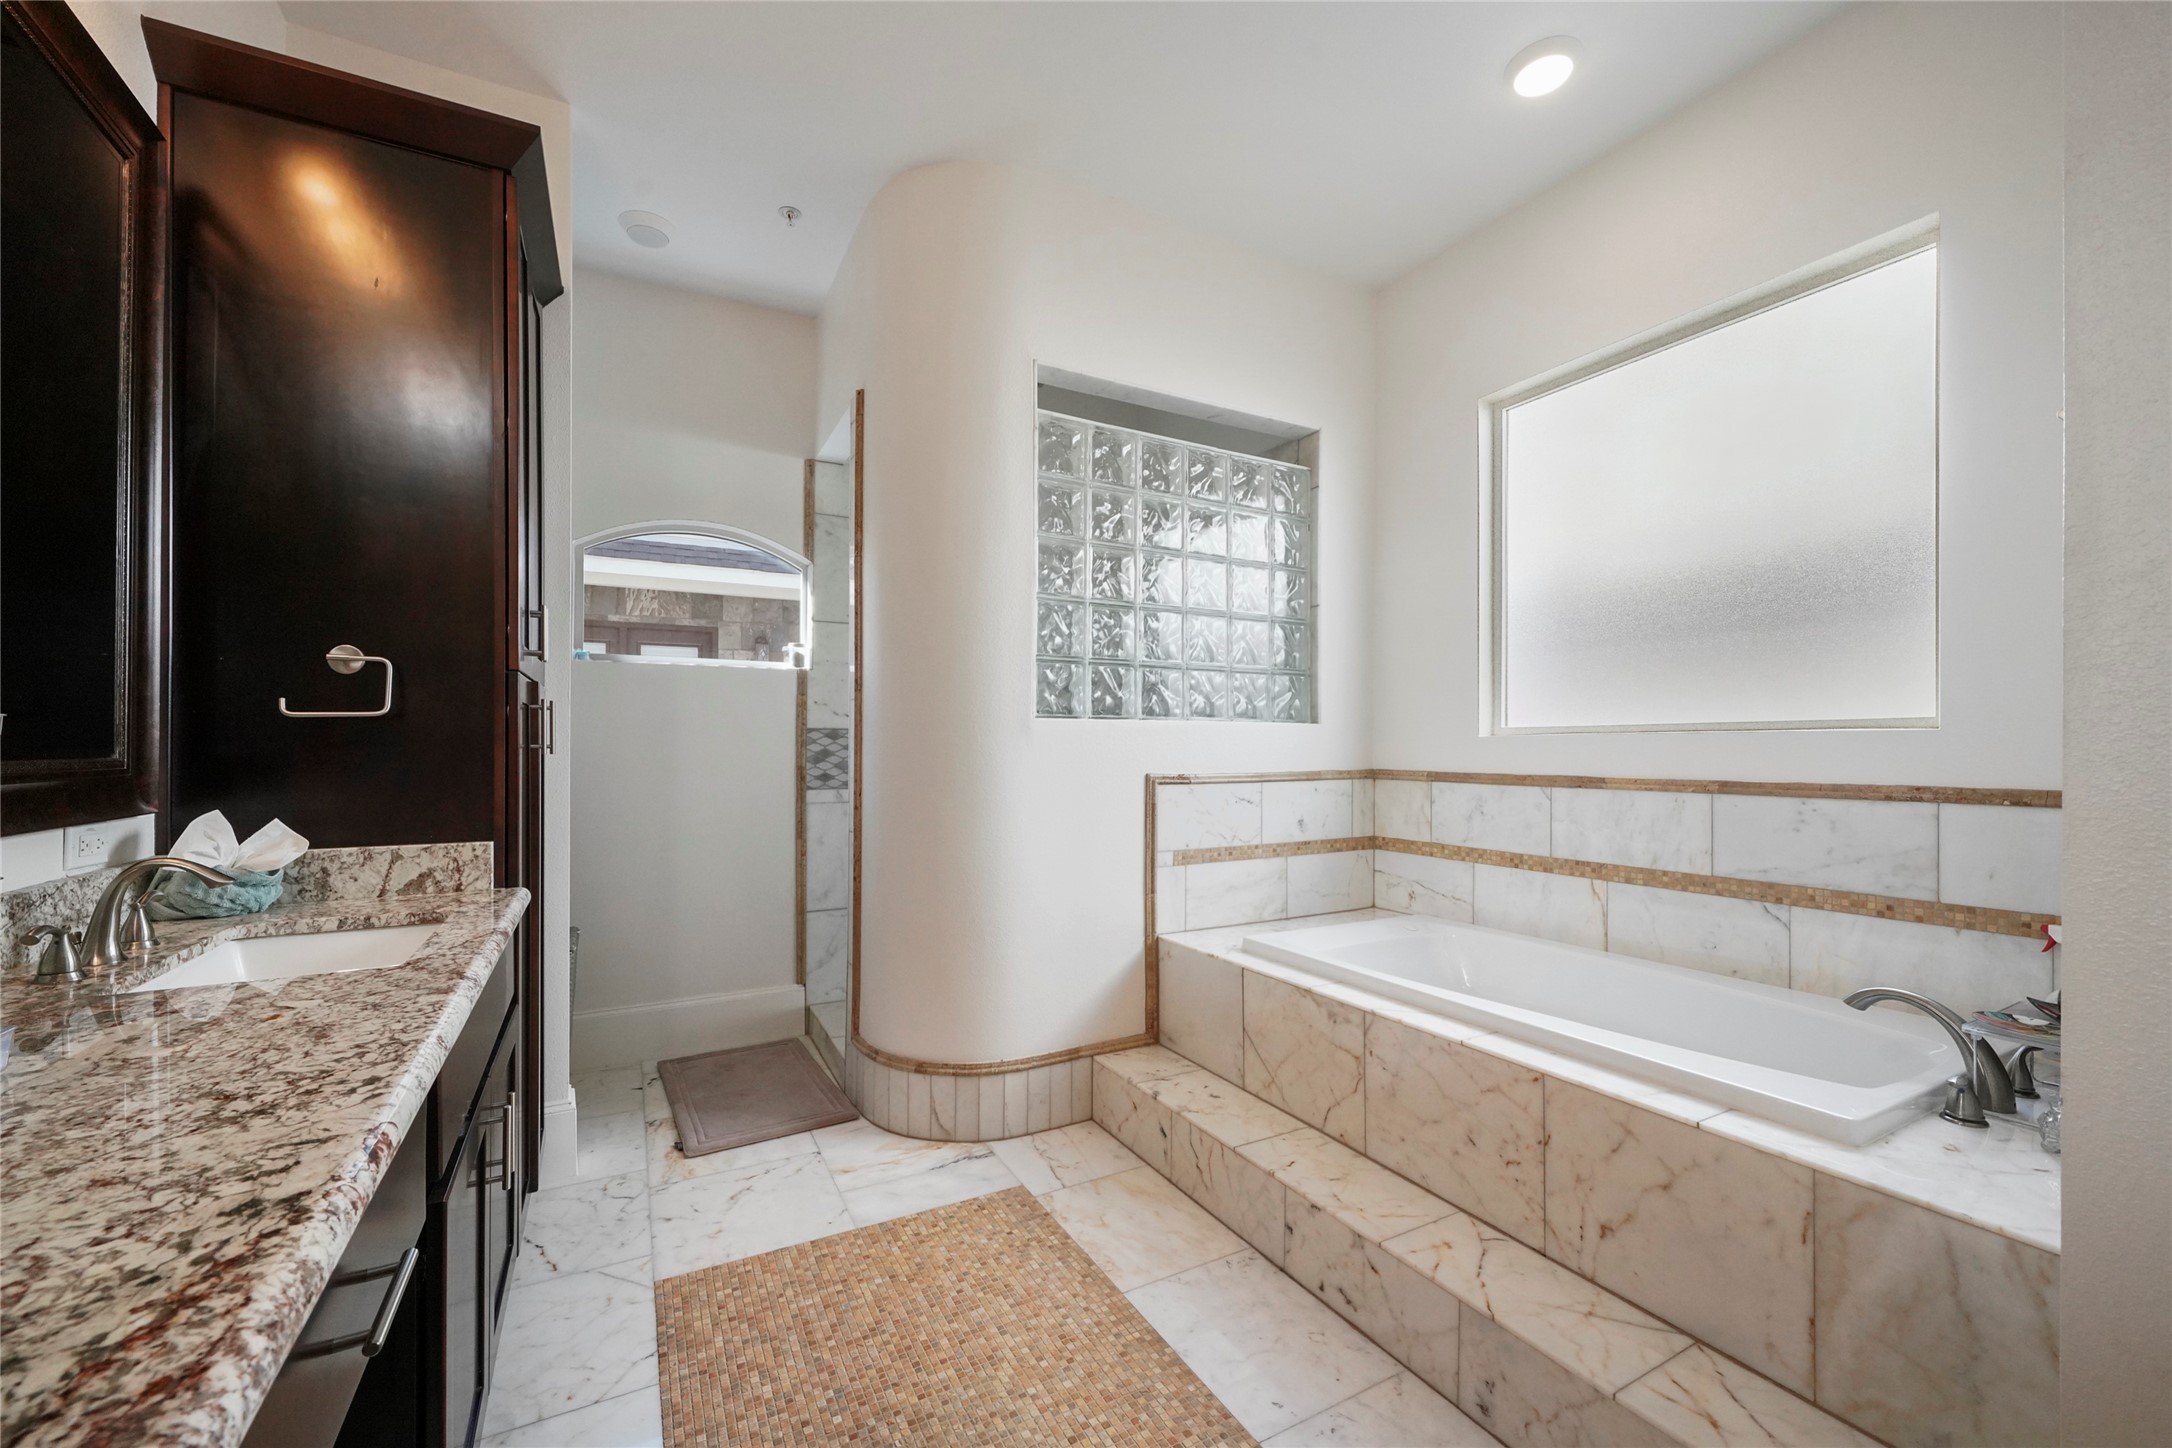 Primary, en-suite bathroom with separate soaking tub and large walk-in closet.